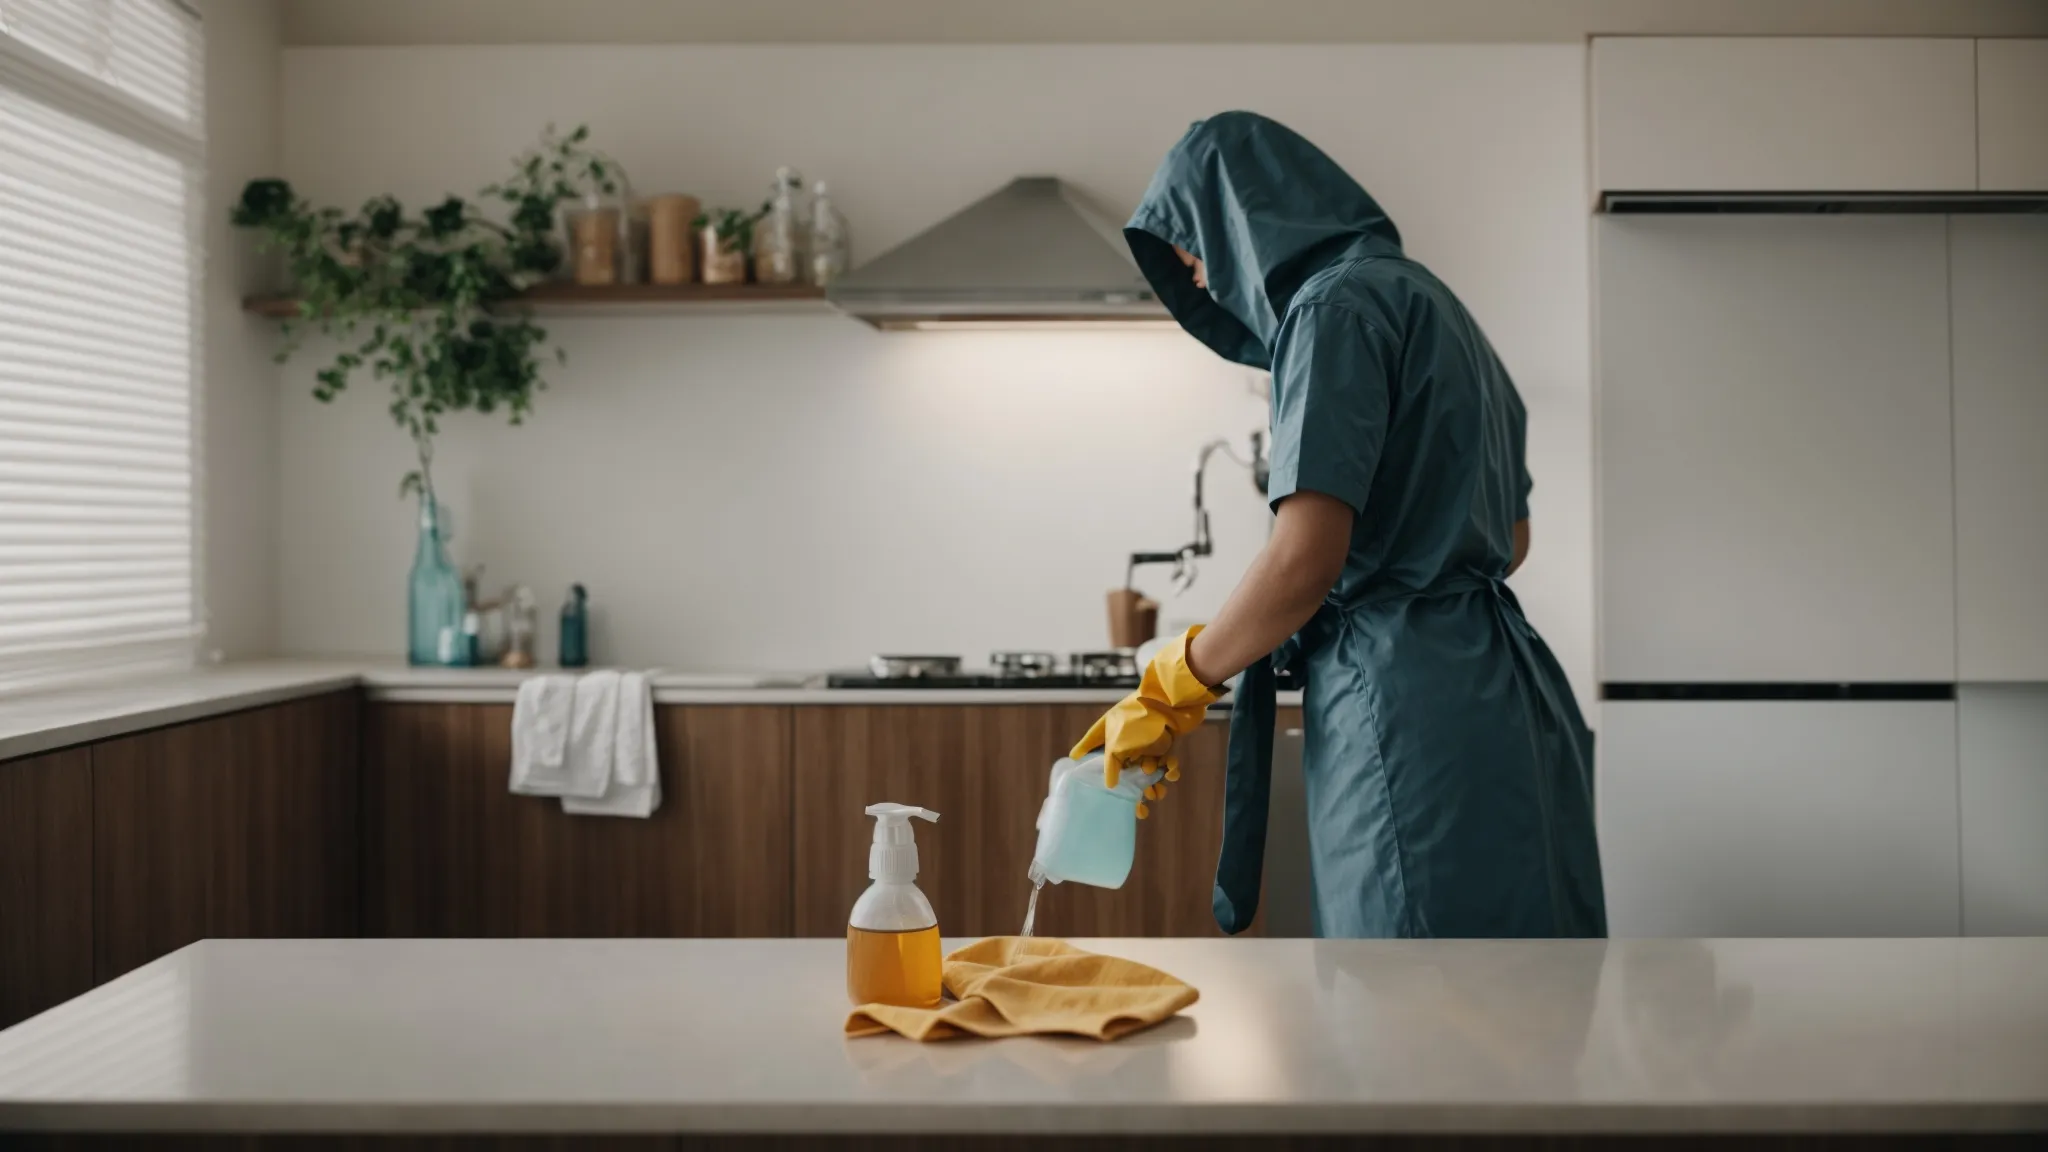 a person stands in front of a kitchen hood, equipped with gloves and holding a cleaning spray bottle and cloth, ready to begin the cleaning process.